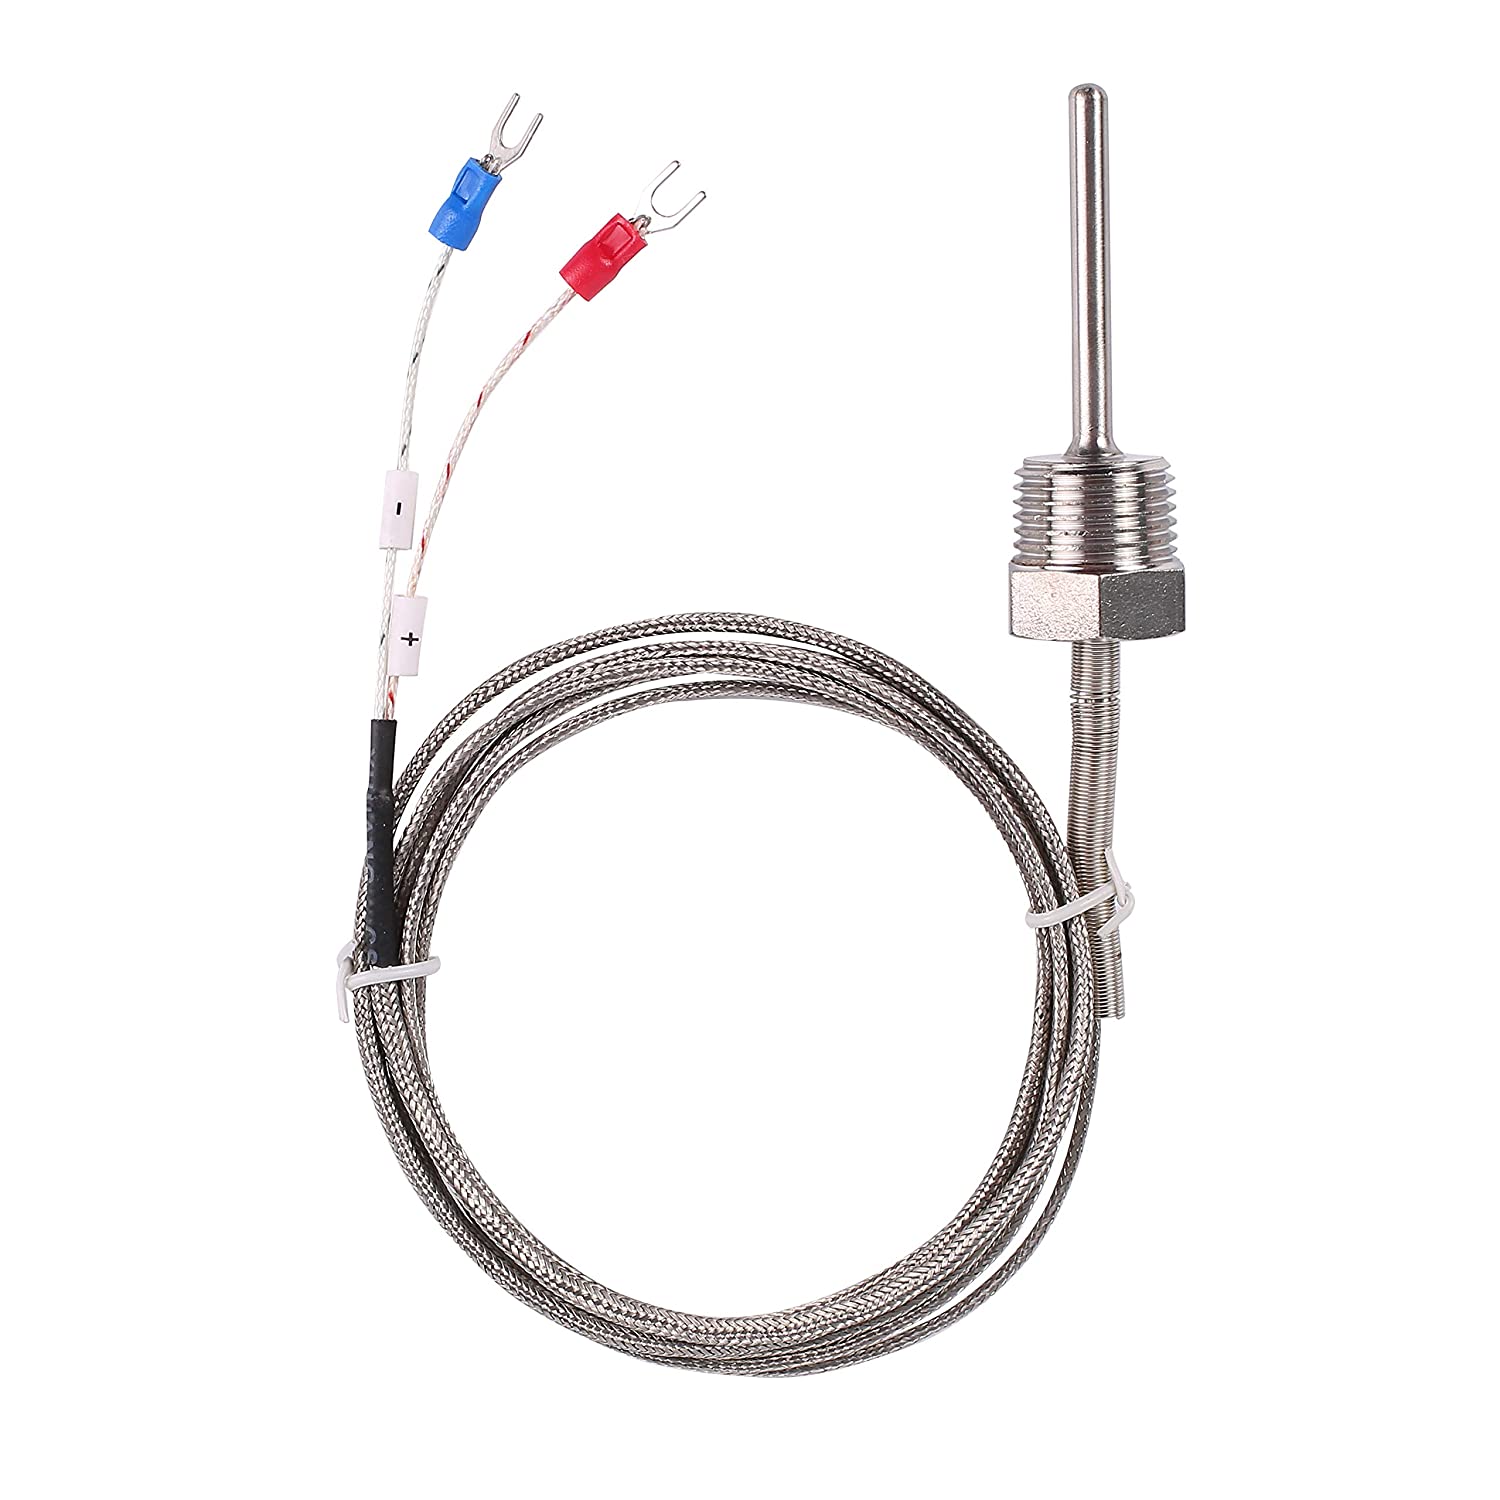 Cặp nhiệt điện (Thermocouple)